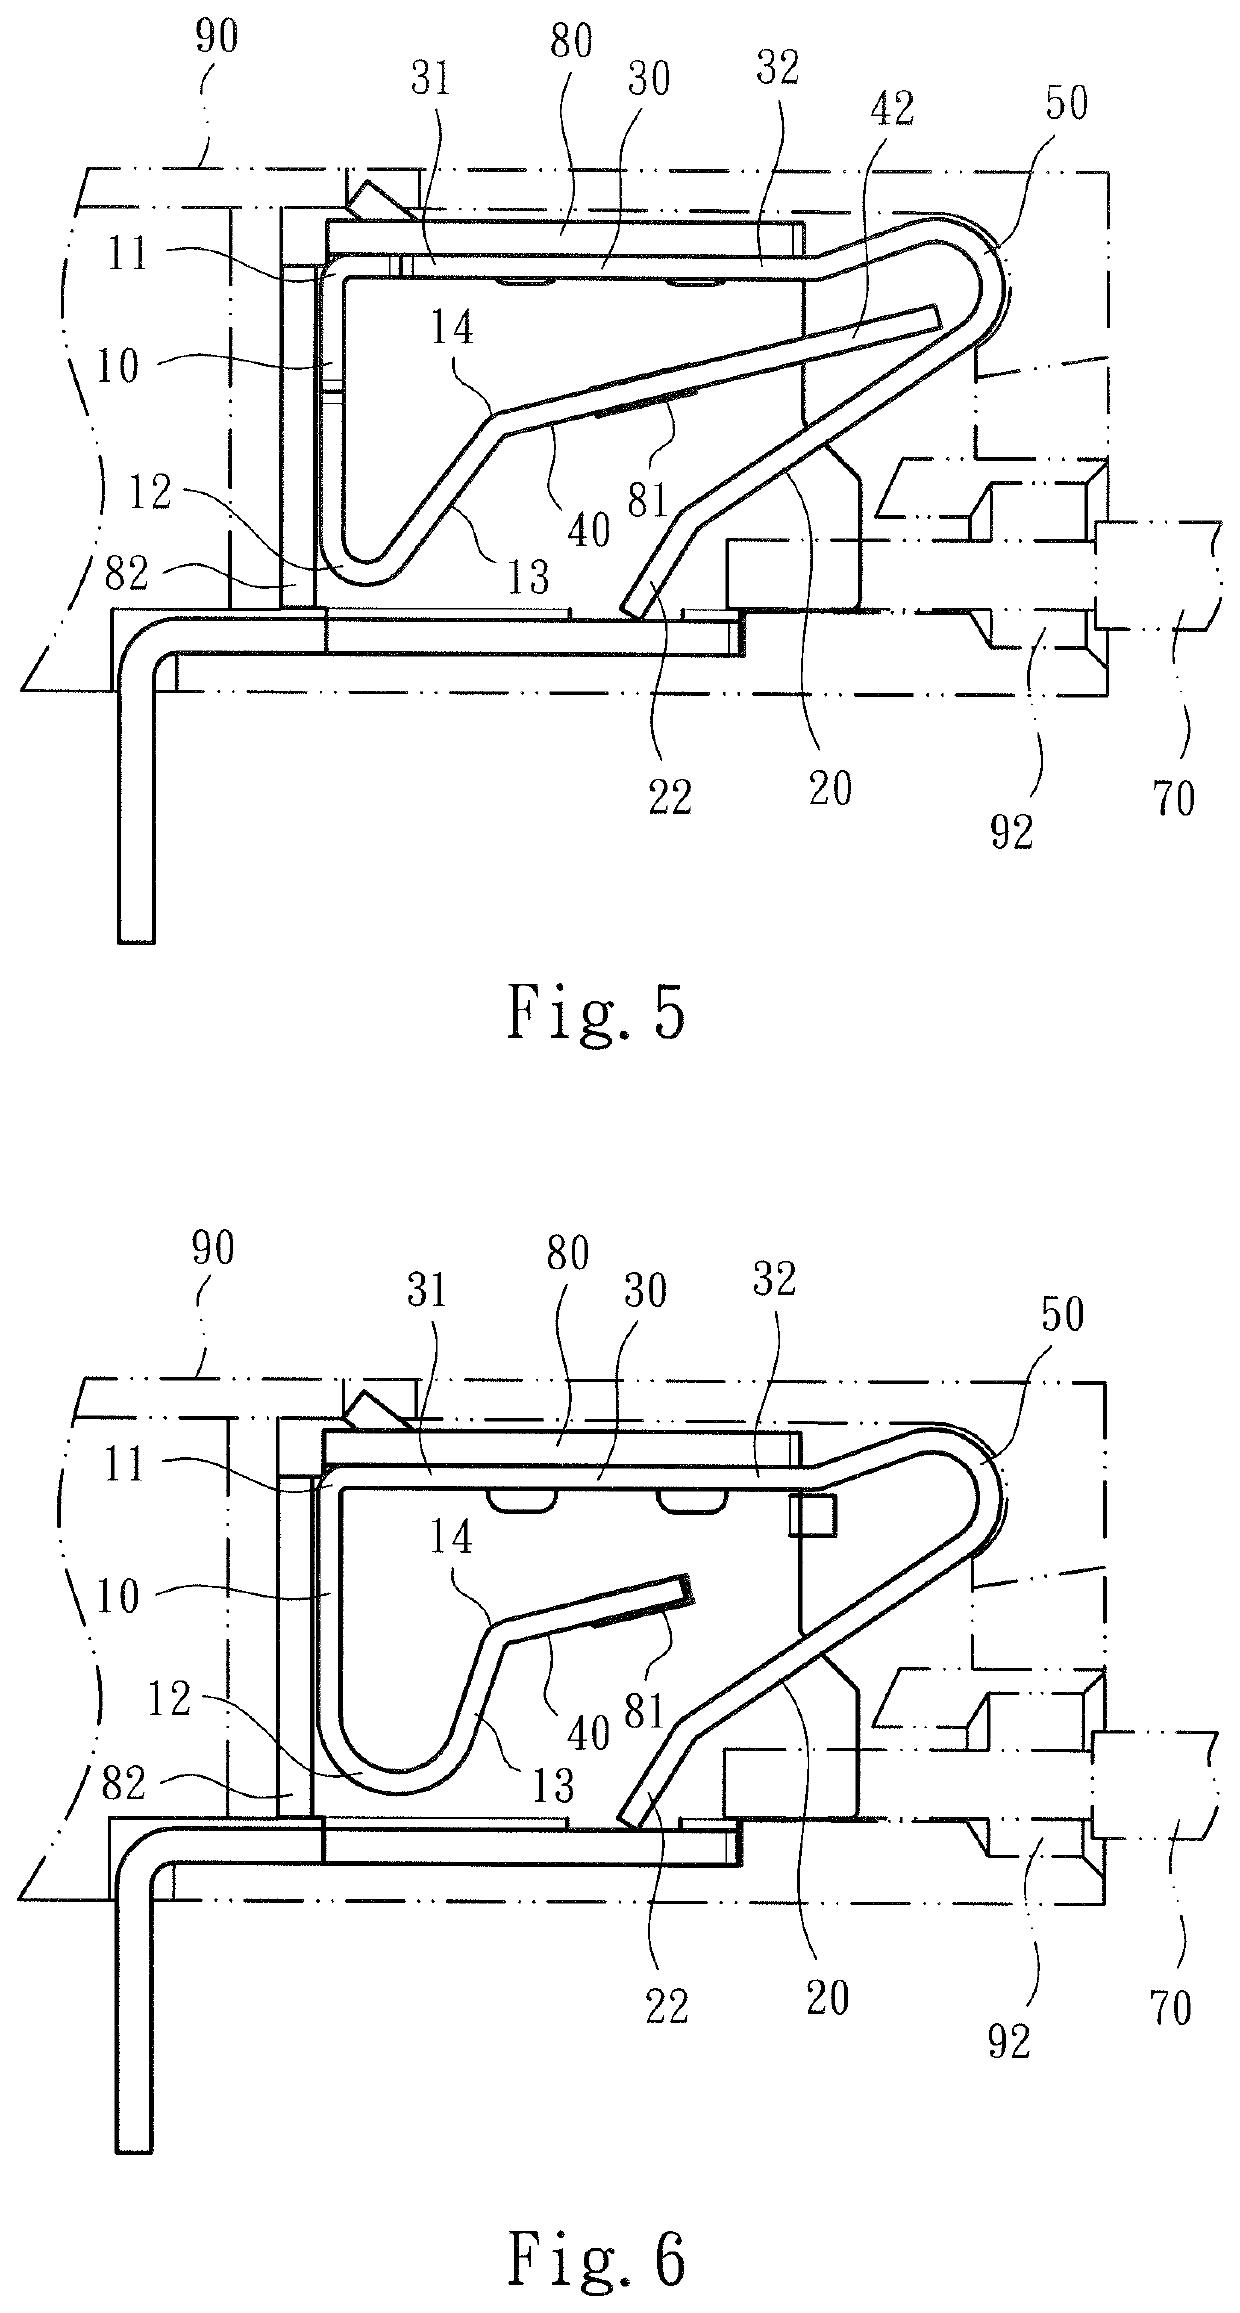 Metal leaf spring structure of electrical connection terminal